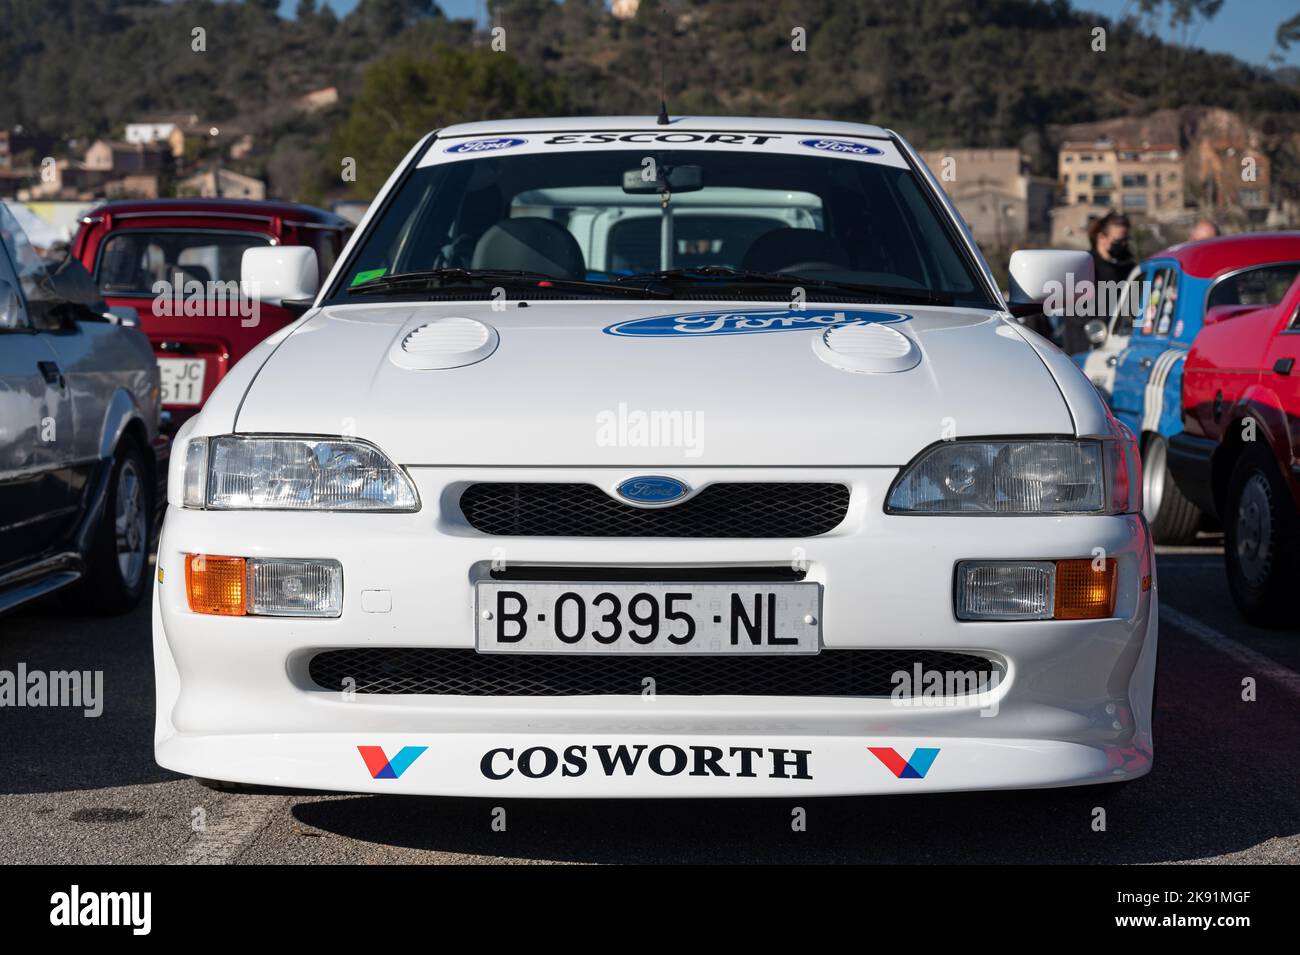 The white Ford Escort mk5 Cosworth rally car with Valvoline sponsor. Stock Photo